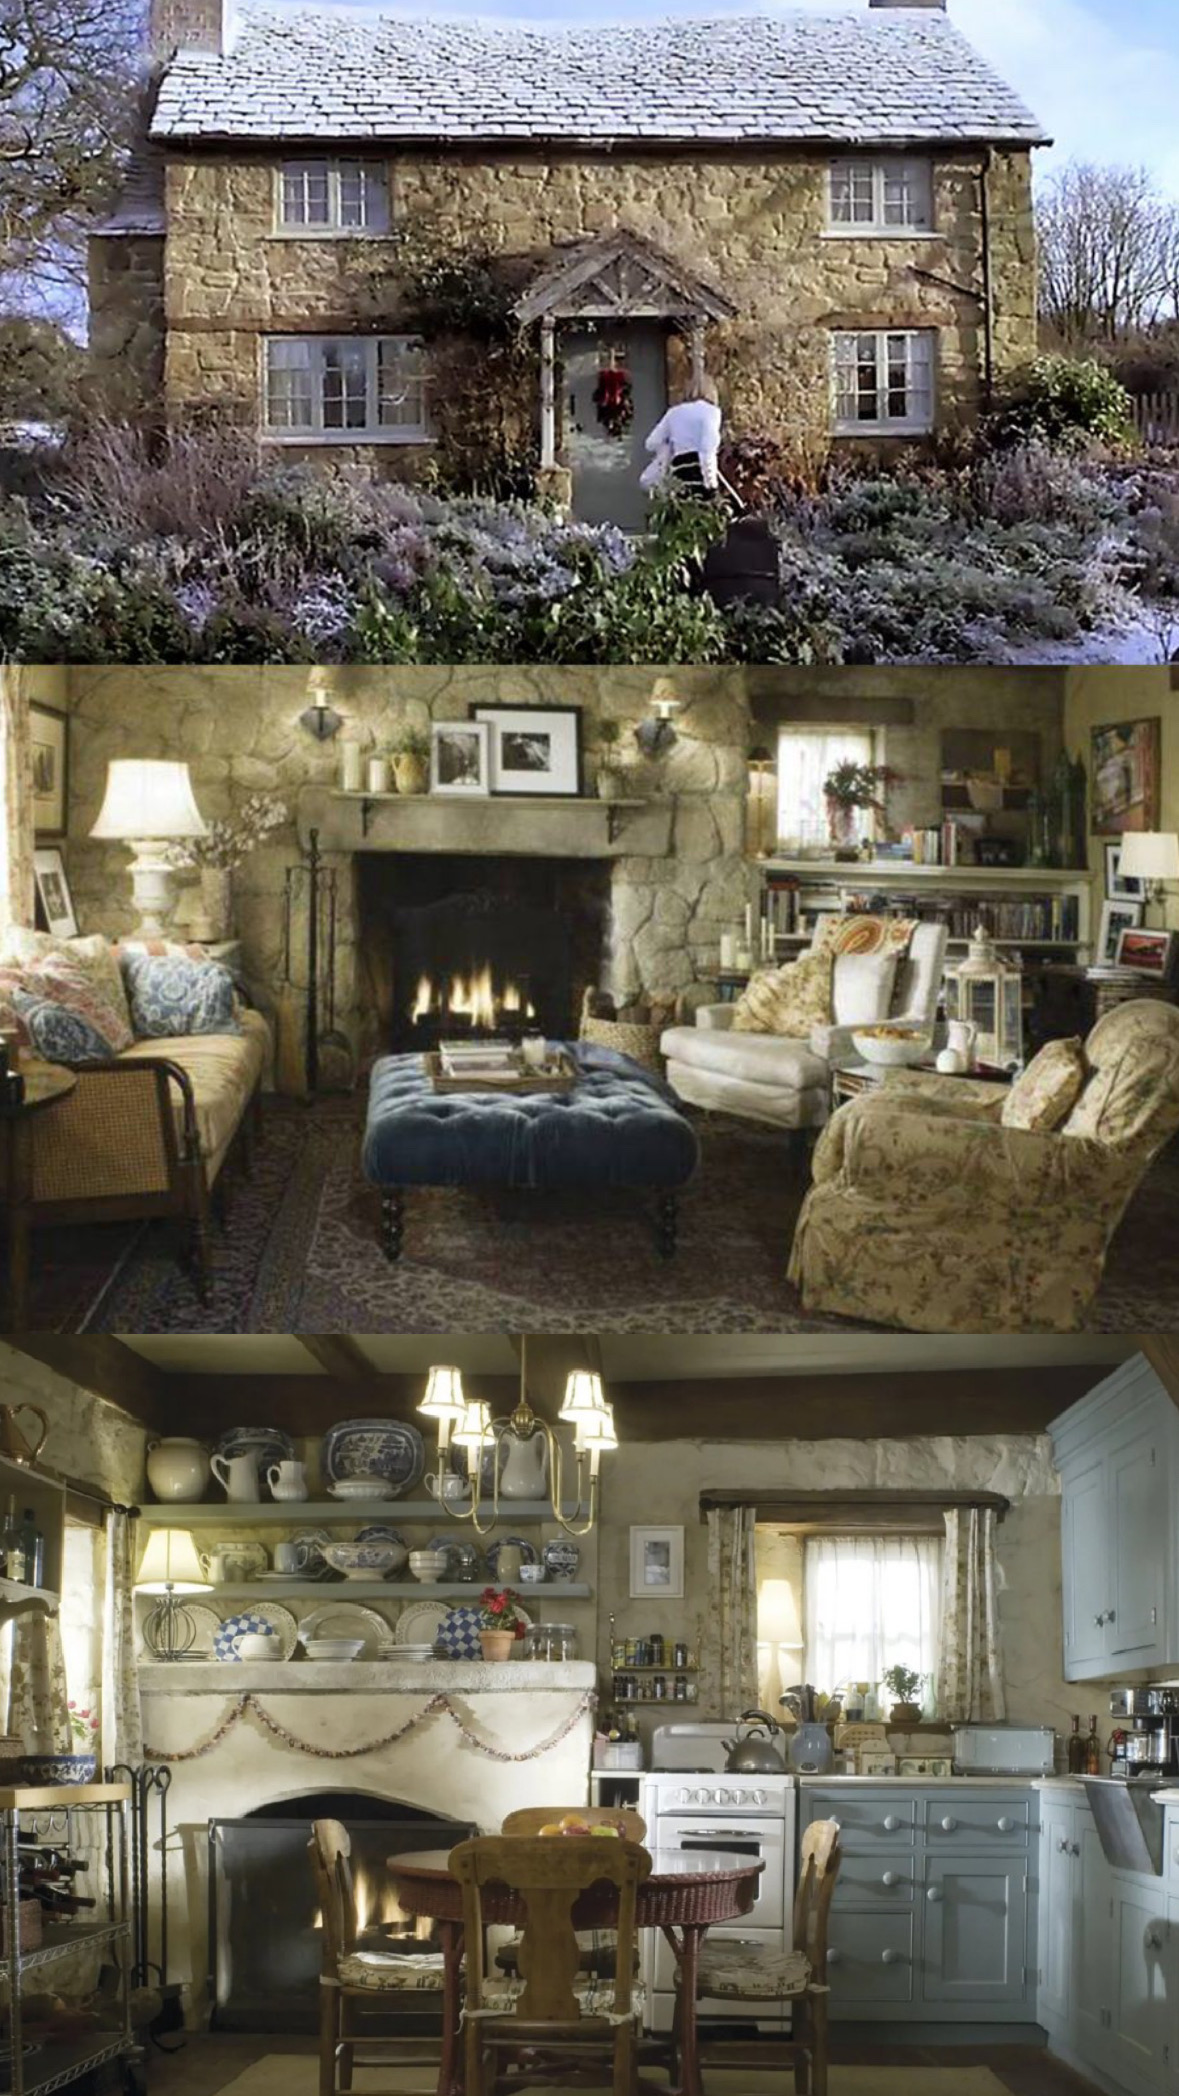 The Holiday cottage interiors